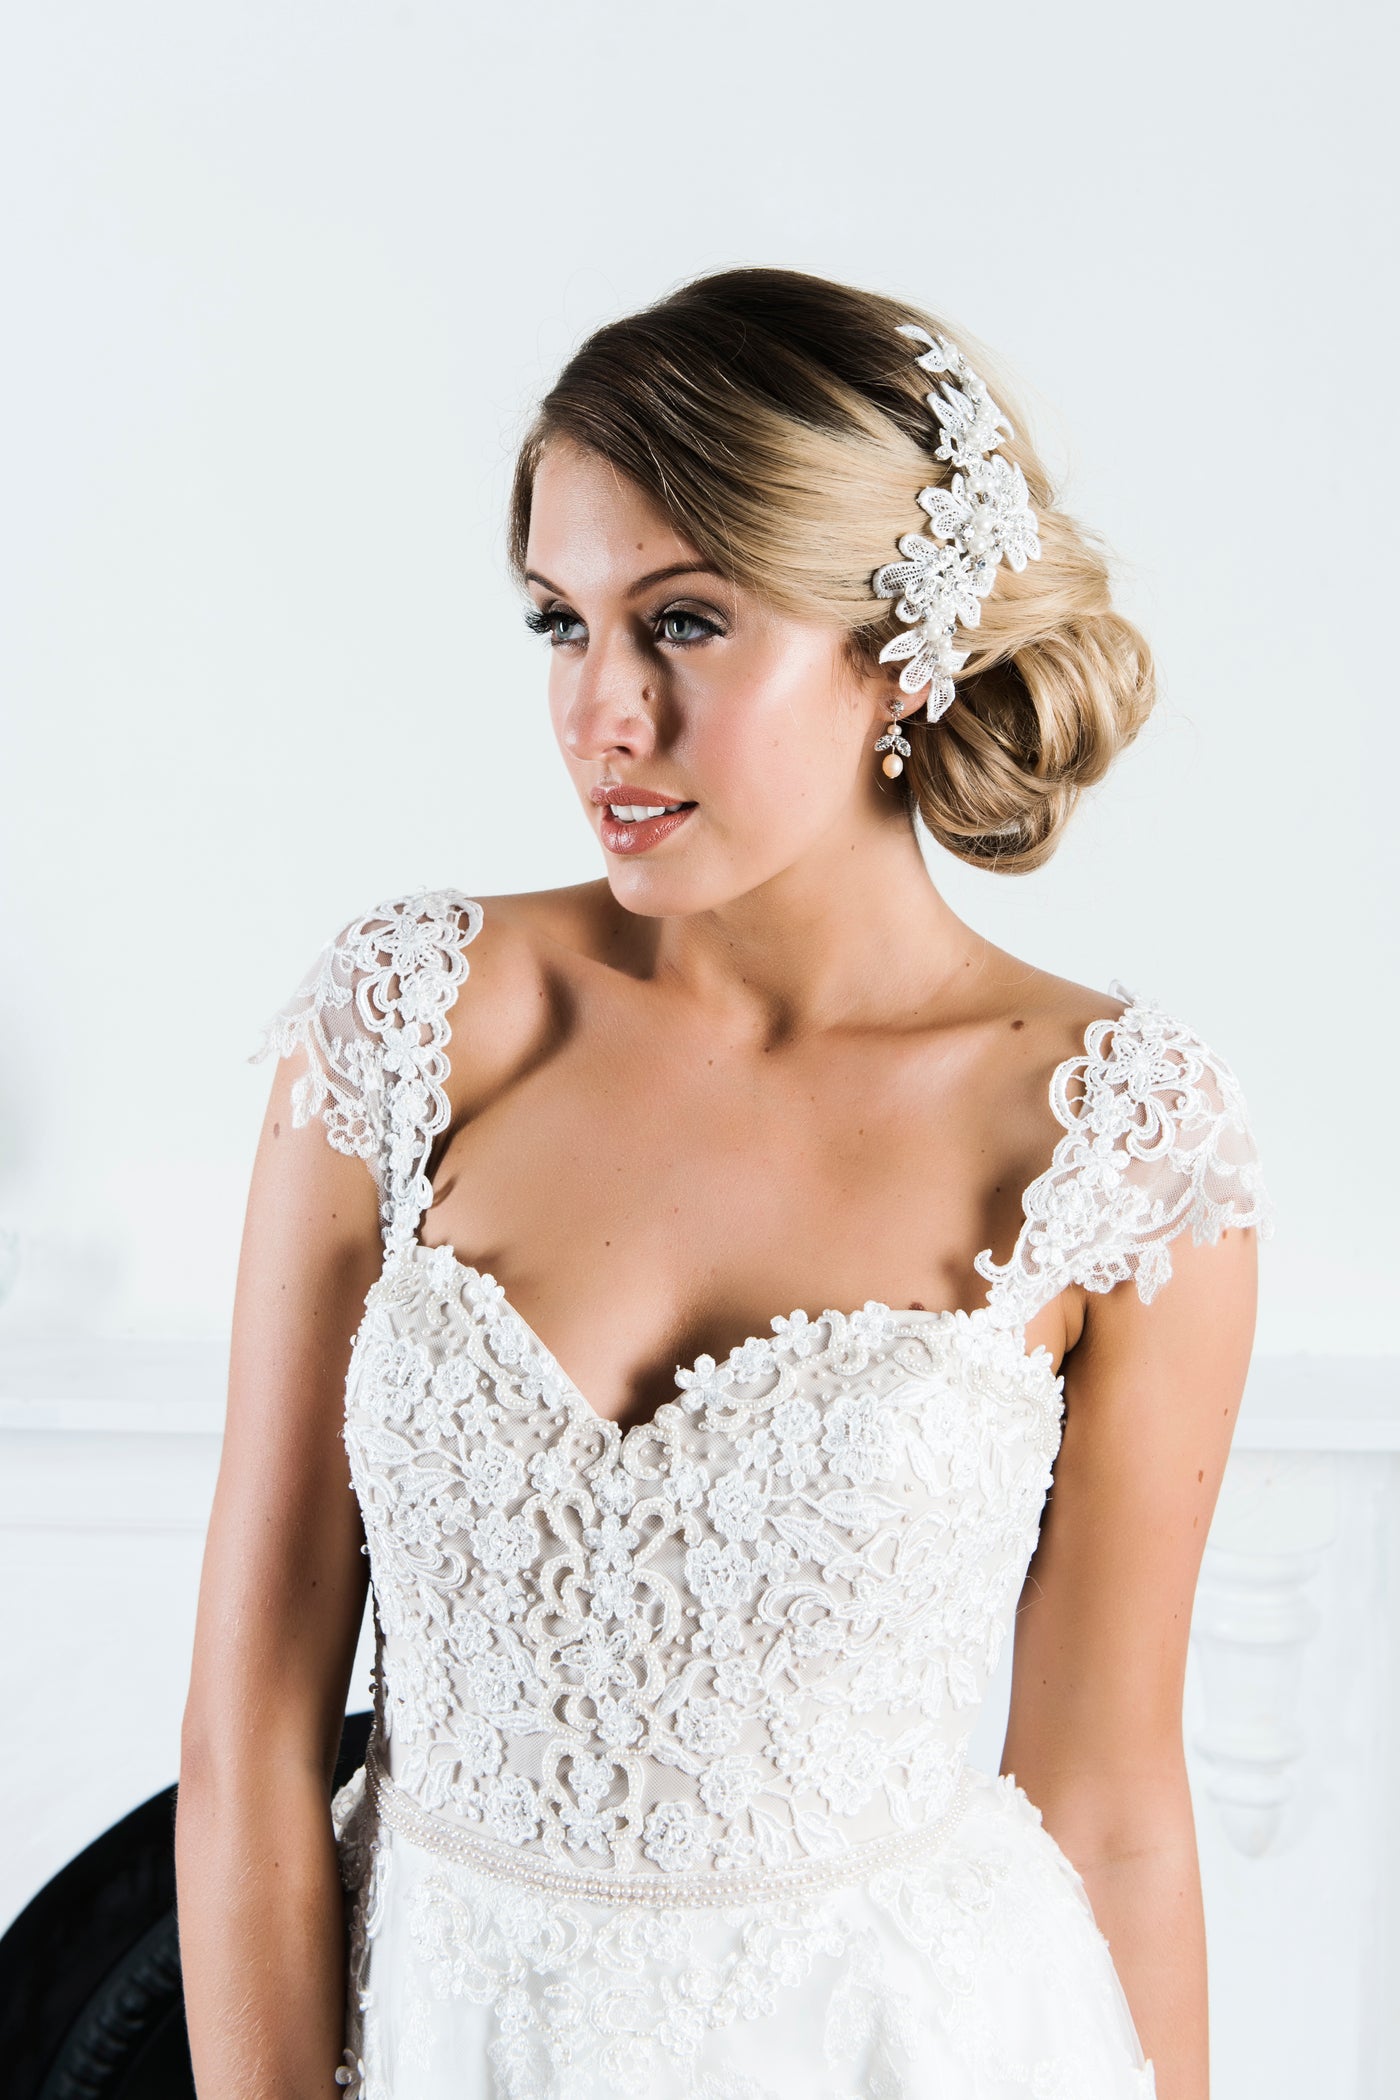 Ivory wedding gown with pearl adorned lace bodice and cap sleeves